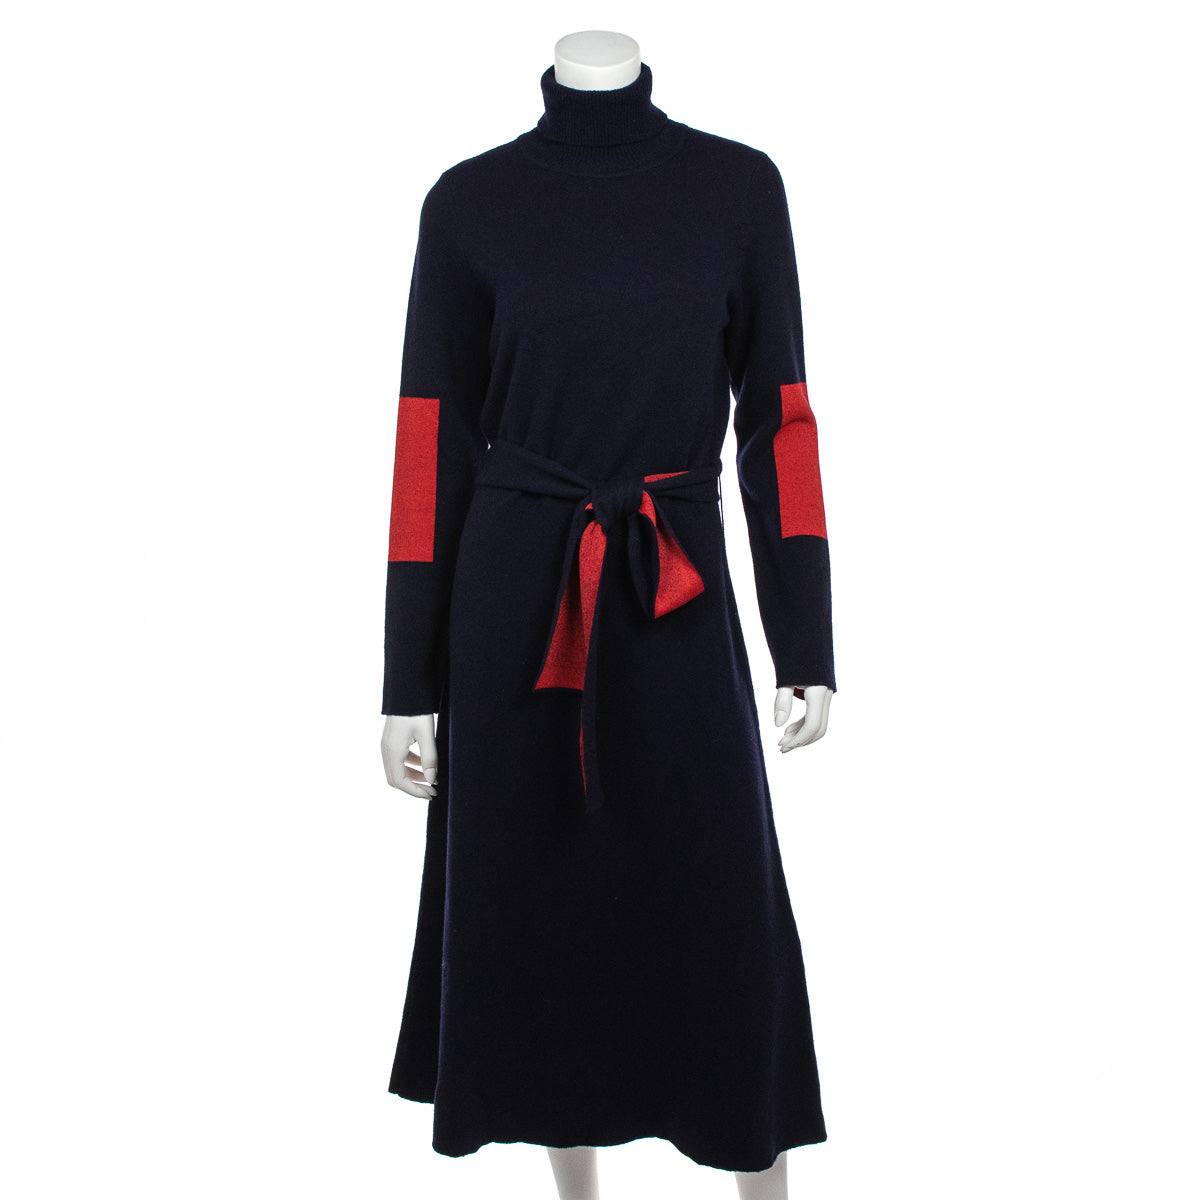 Victoria Beckham Navy & Red Wool Knit Belted Dress Size XL | UK 16 - Love that Bag etc - Preowned Authentic Designer Handbags & Preloved Fashions